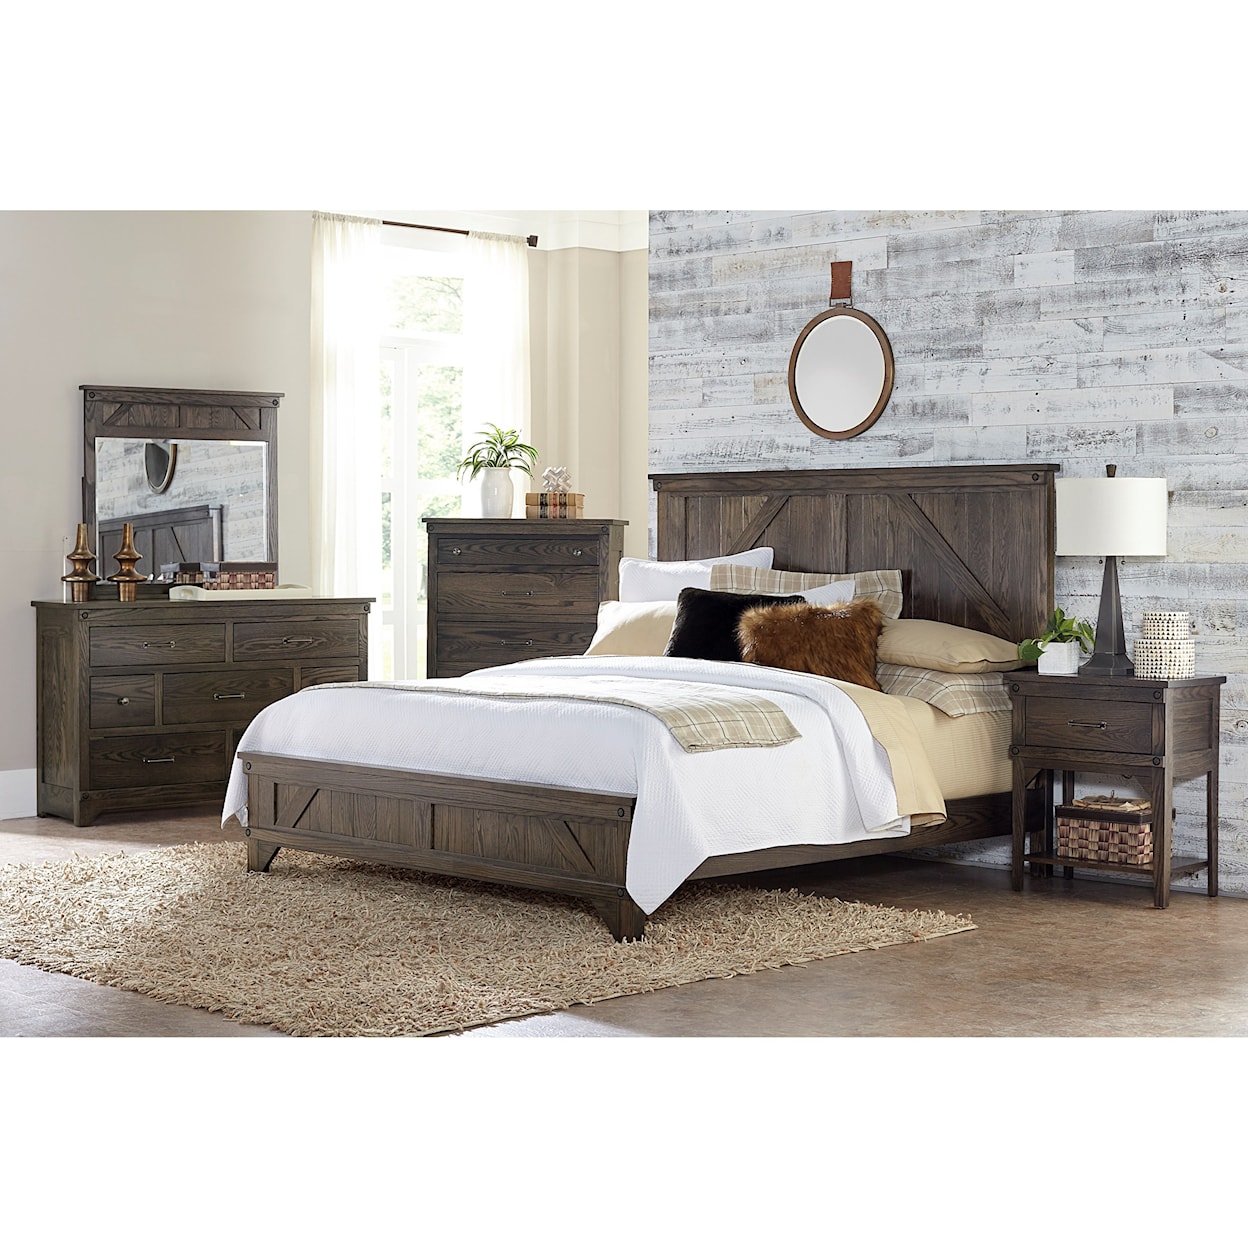 Amish Impressions by Fusion Designs Cedar Lakes Queen Bedroom Group